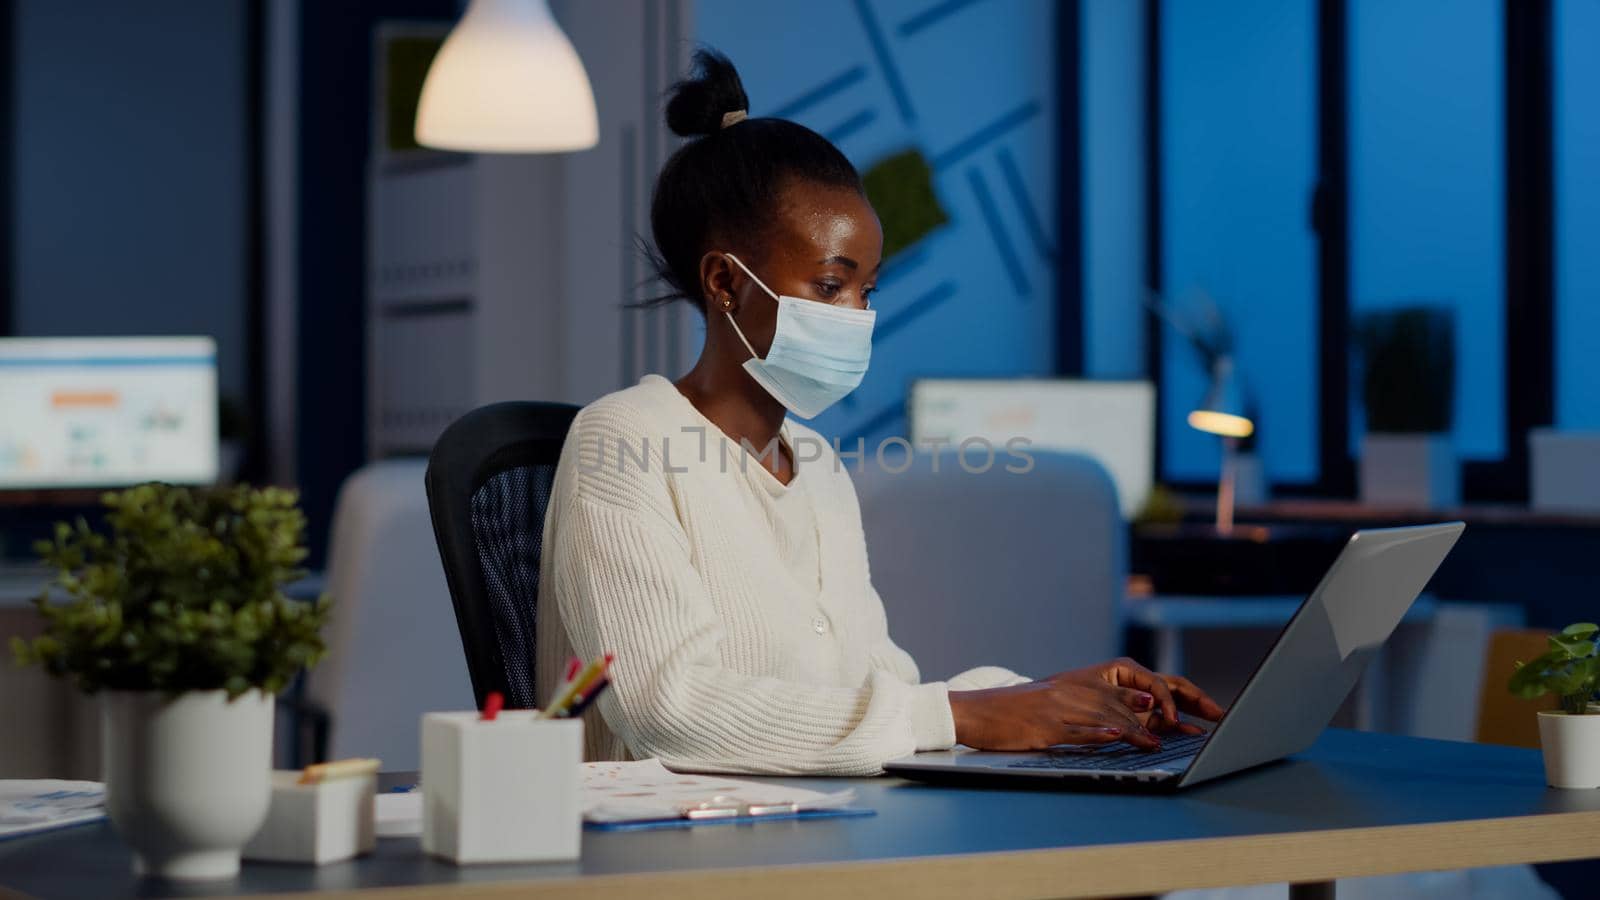 African employee with protection face mask working at laptop overtime in new normal business office to respect deadline of project, analysing documents sitting at desk overtime during global pandemic